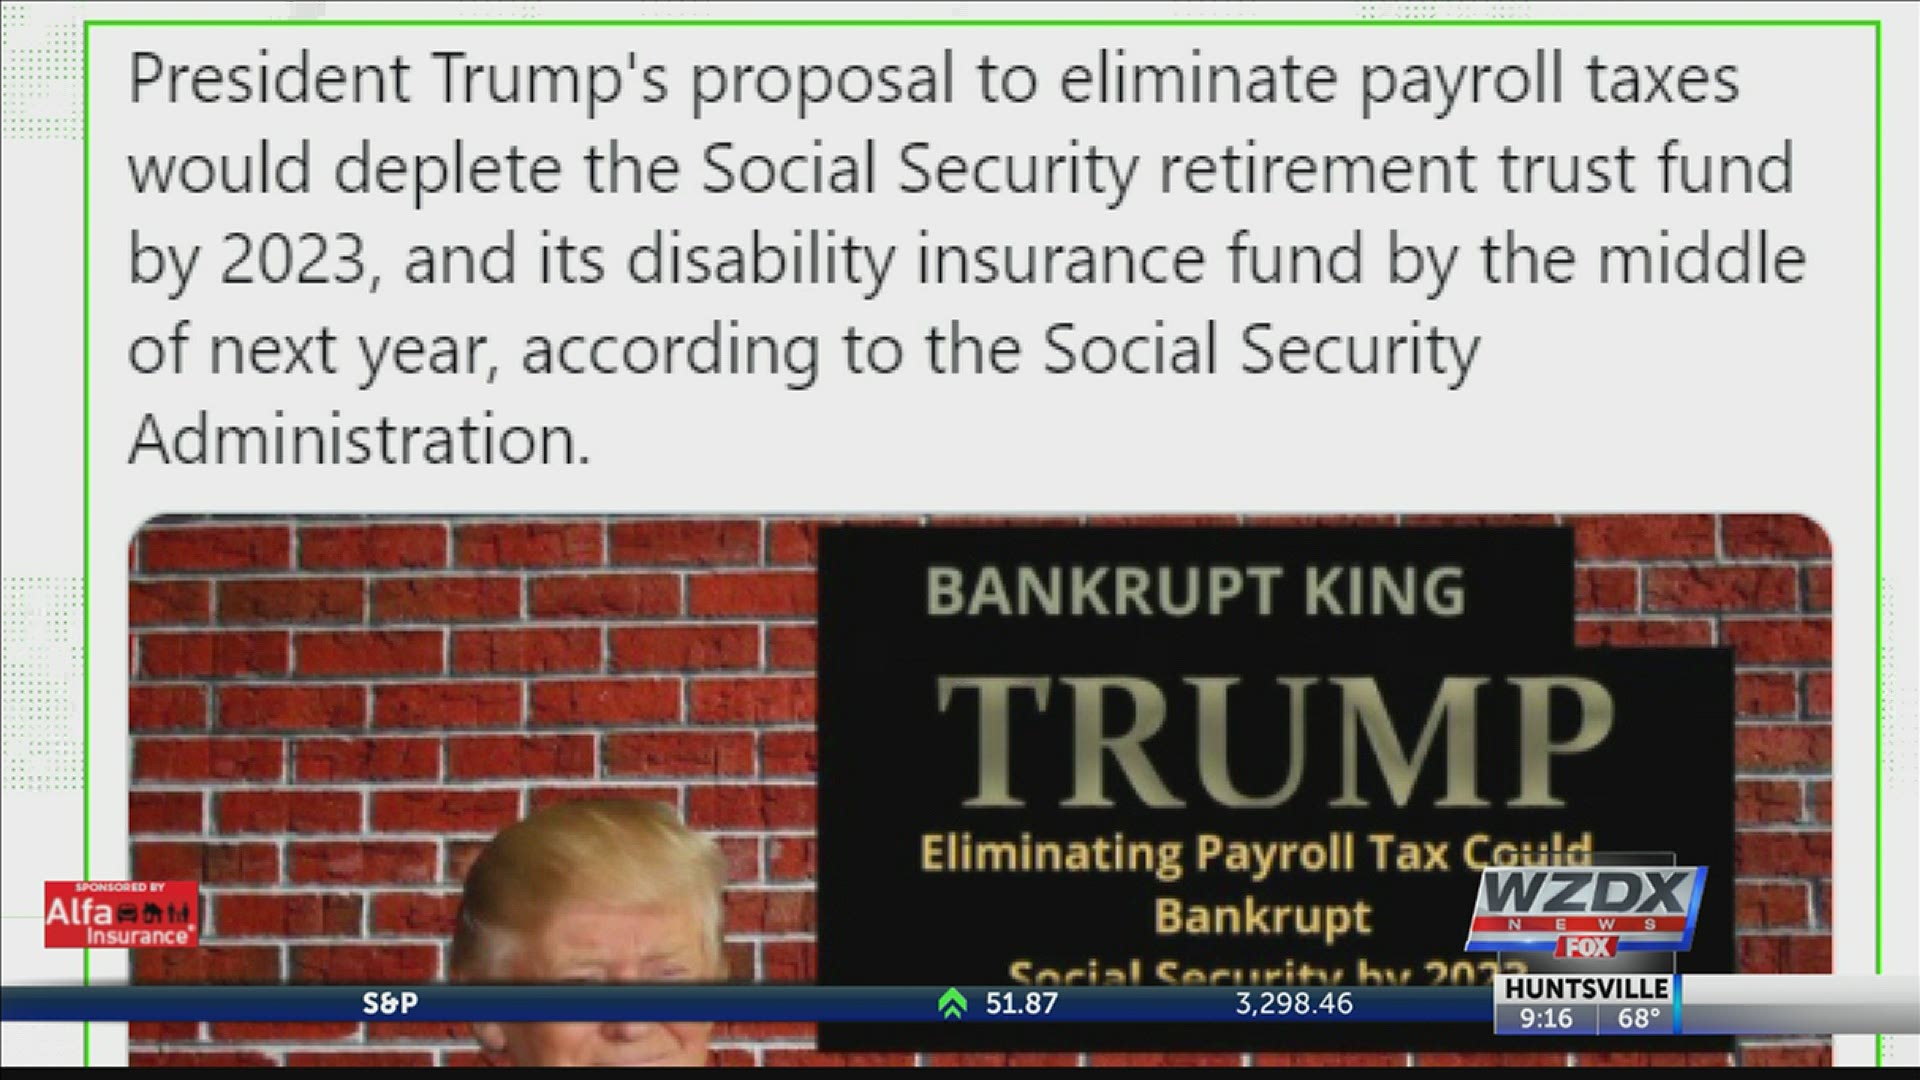 VERIFY: Did the Social Security Administration really say Trump's proposed tax cuts would deplete Social Security by 2023?